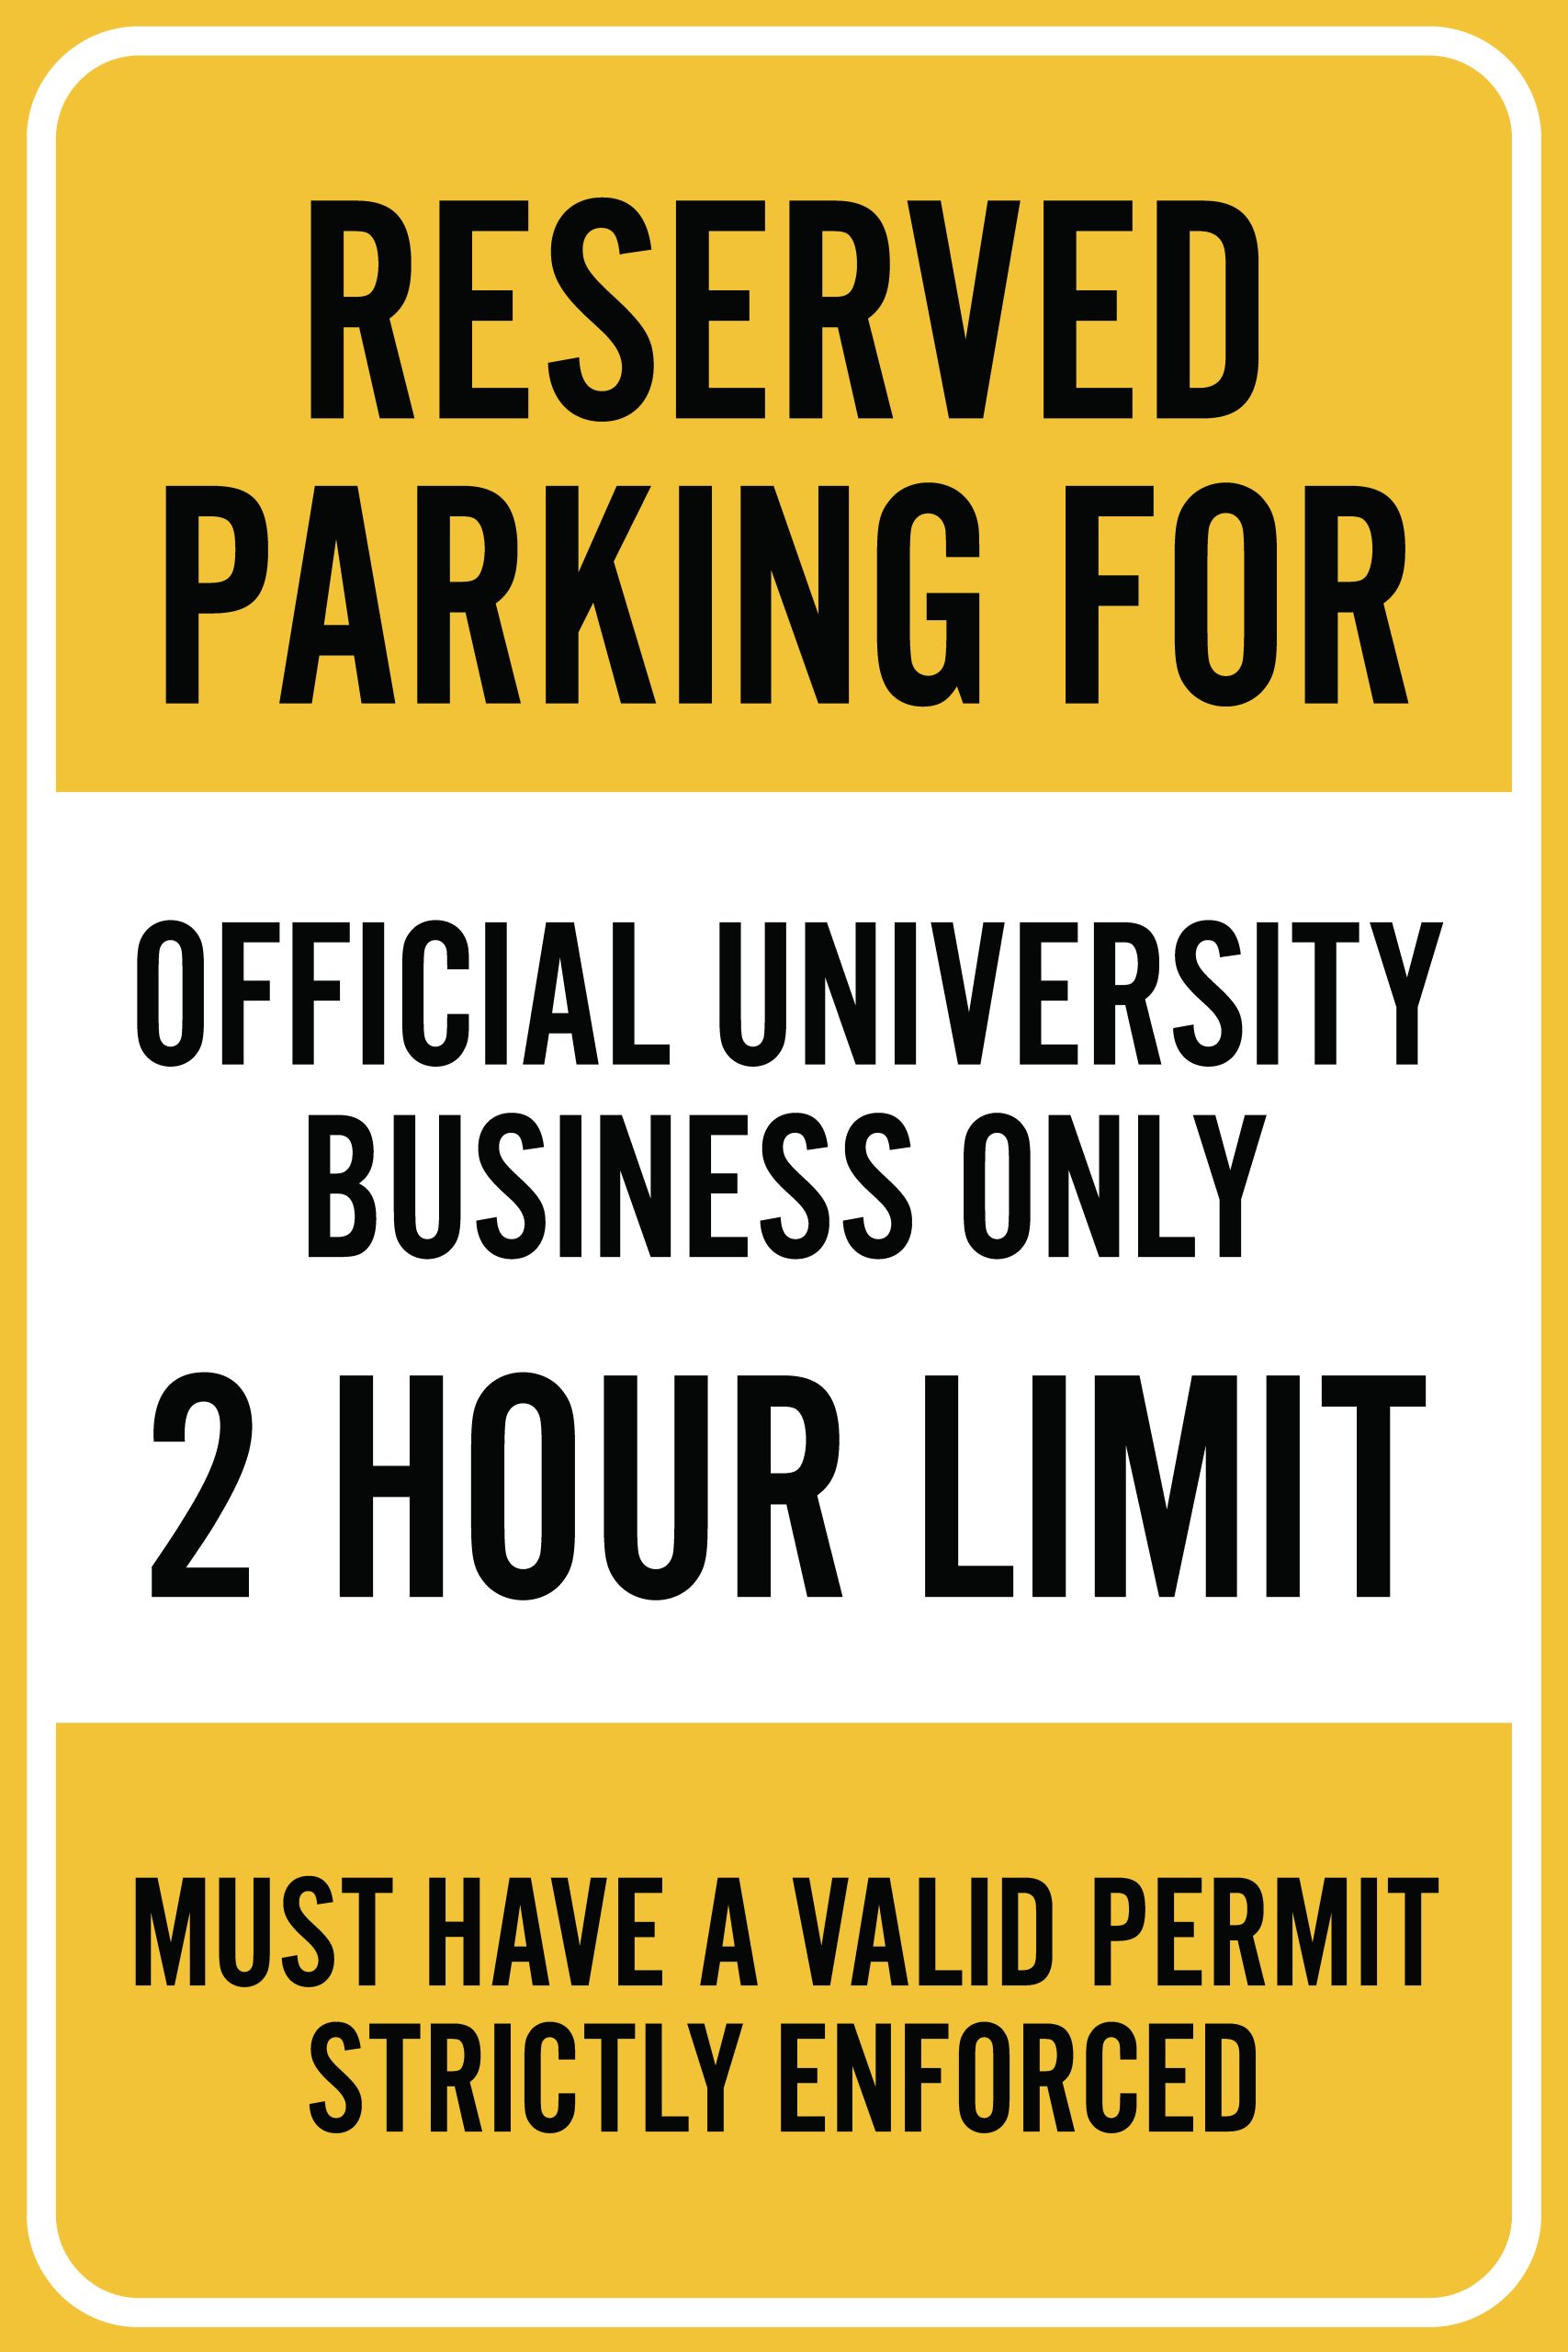 Reserved parking sign example